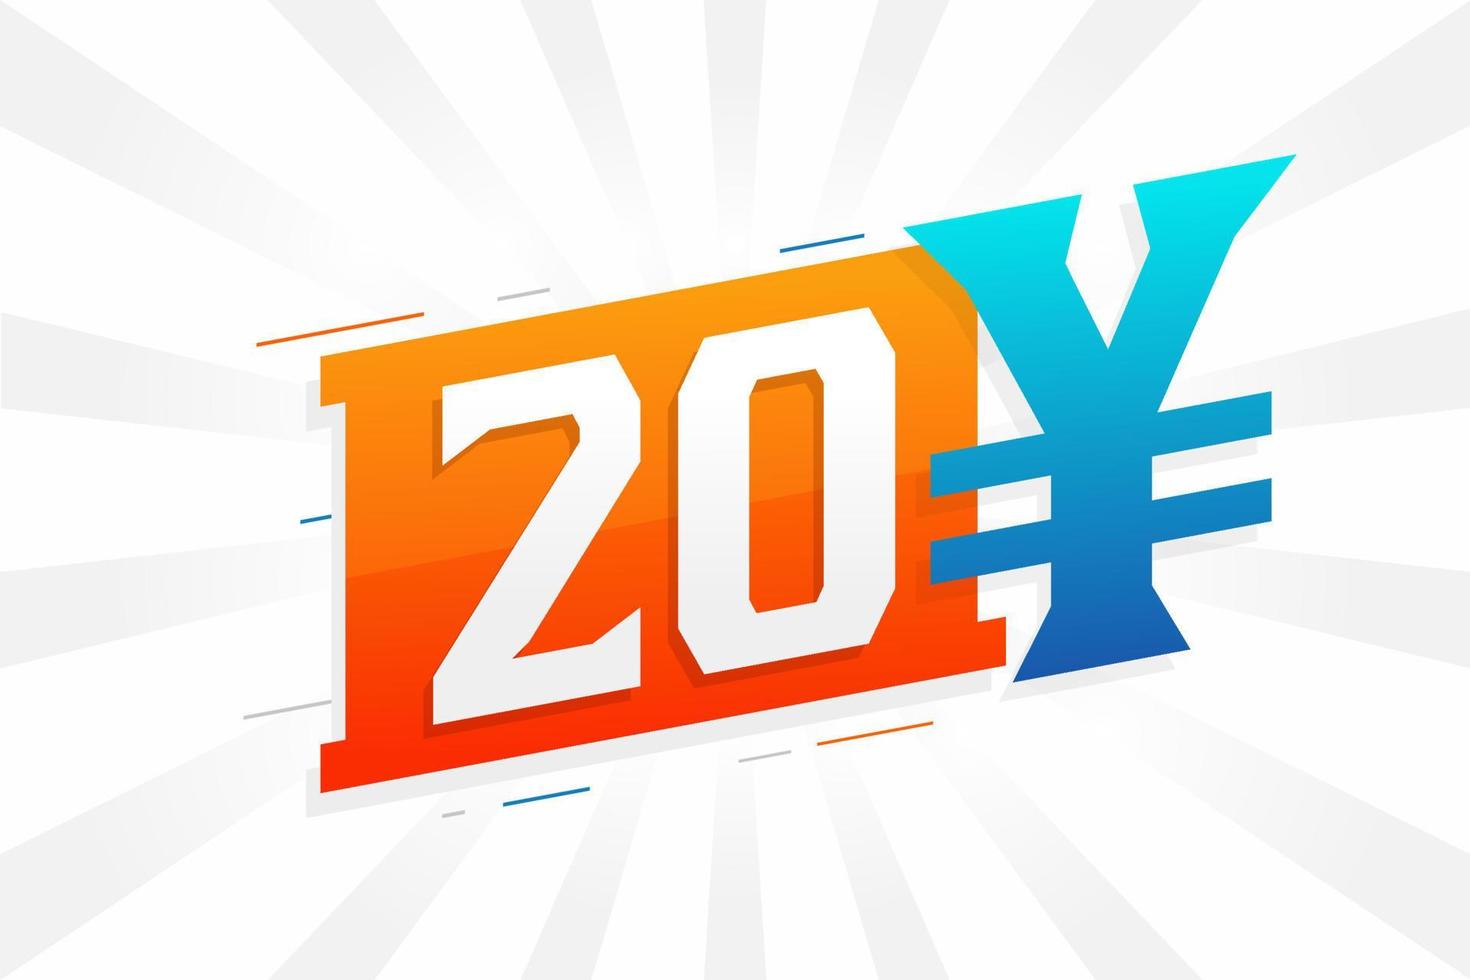 20 Yuan Chinese currency vector text symbol. 20 Yen Japanese currency Money stock vector